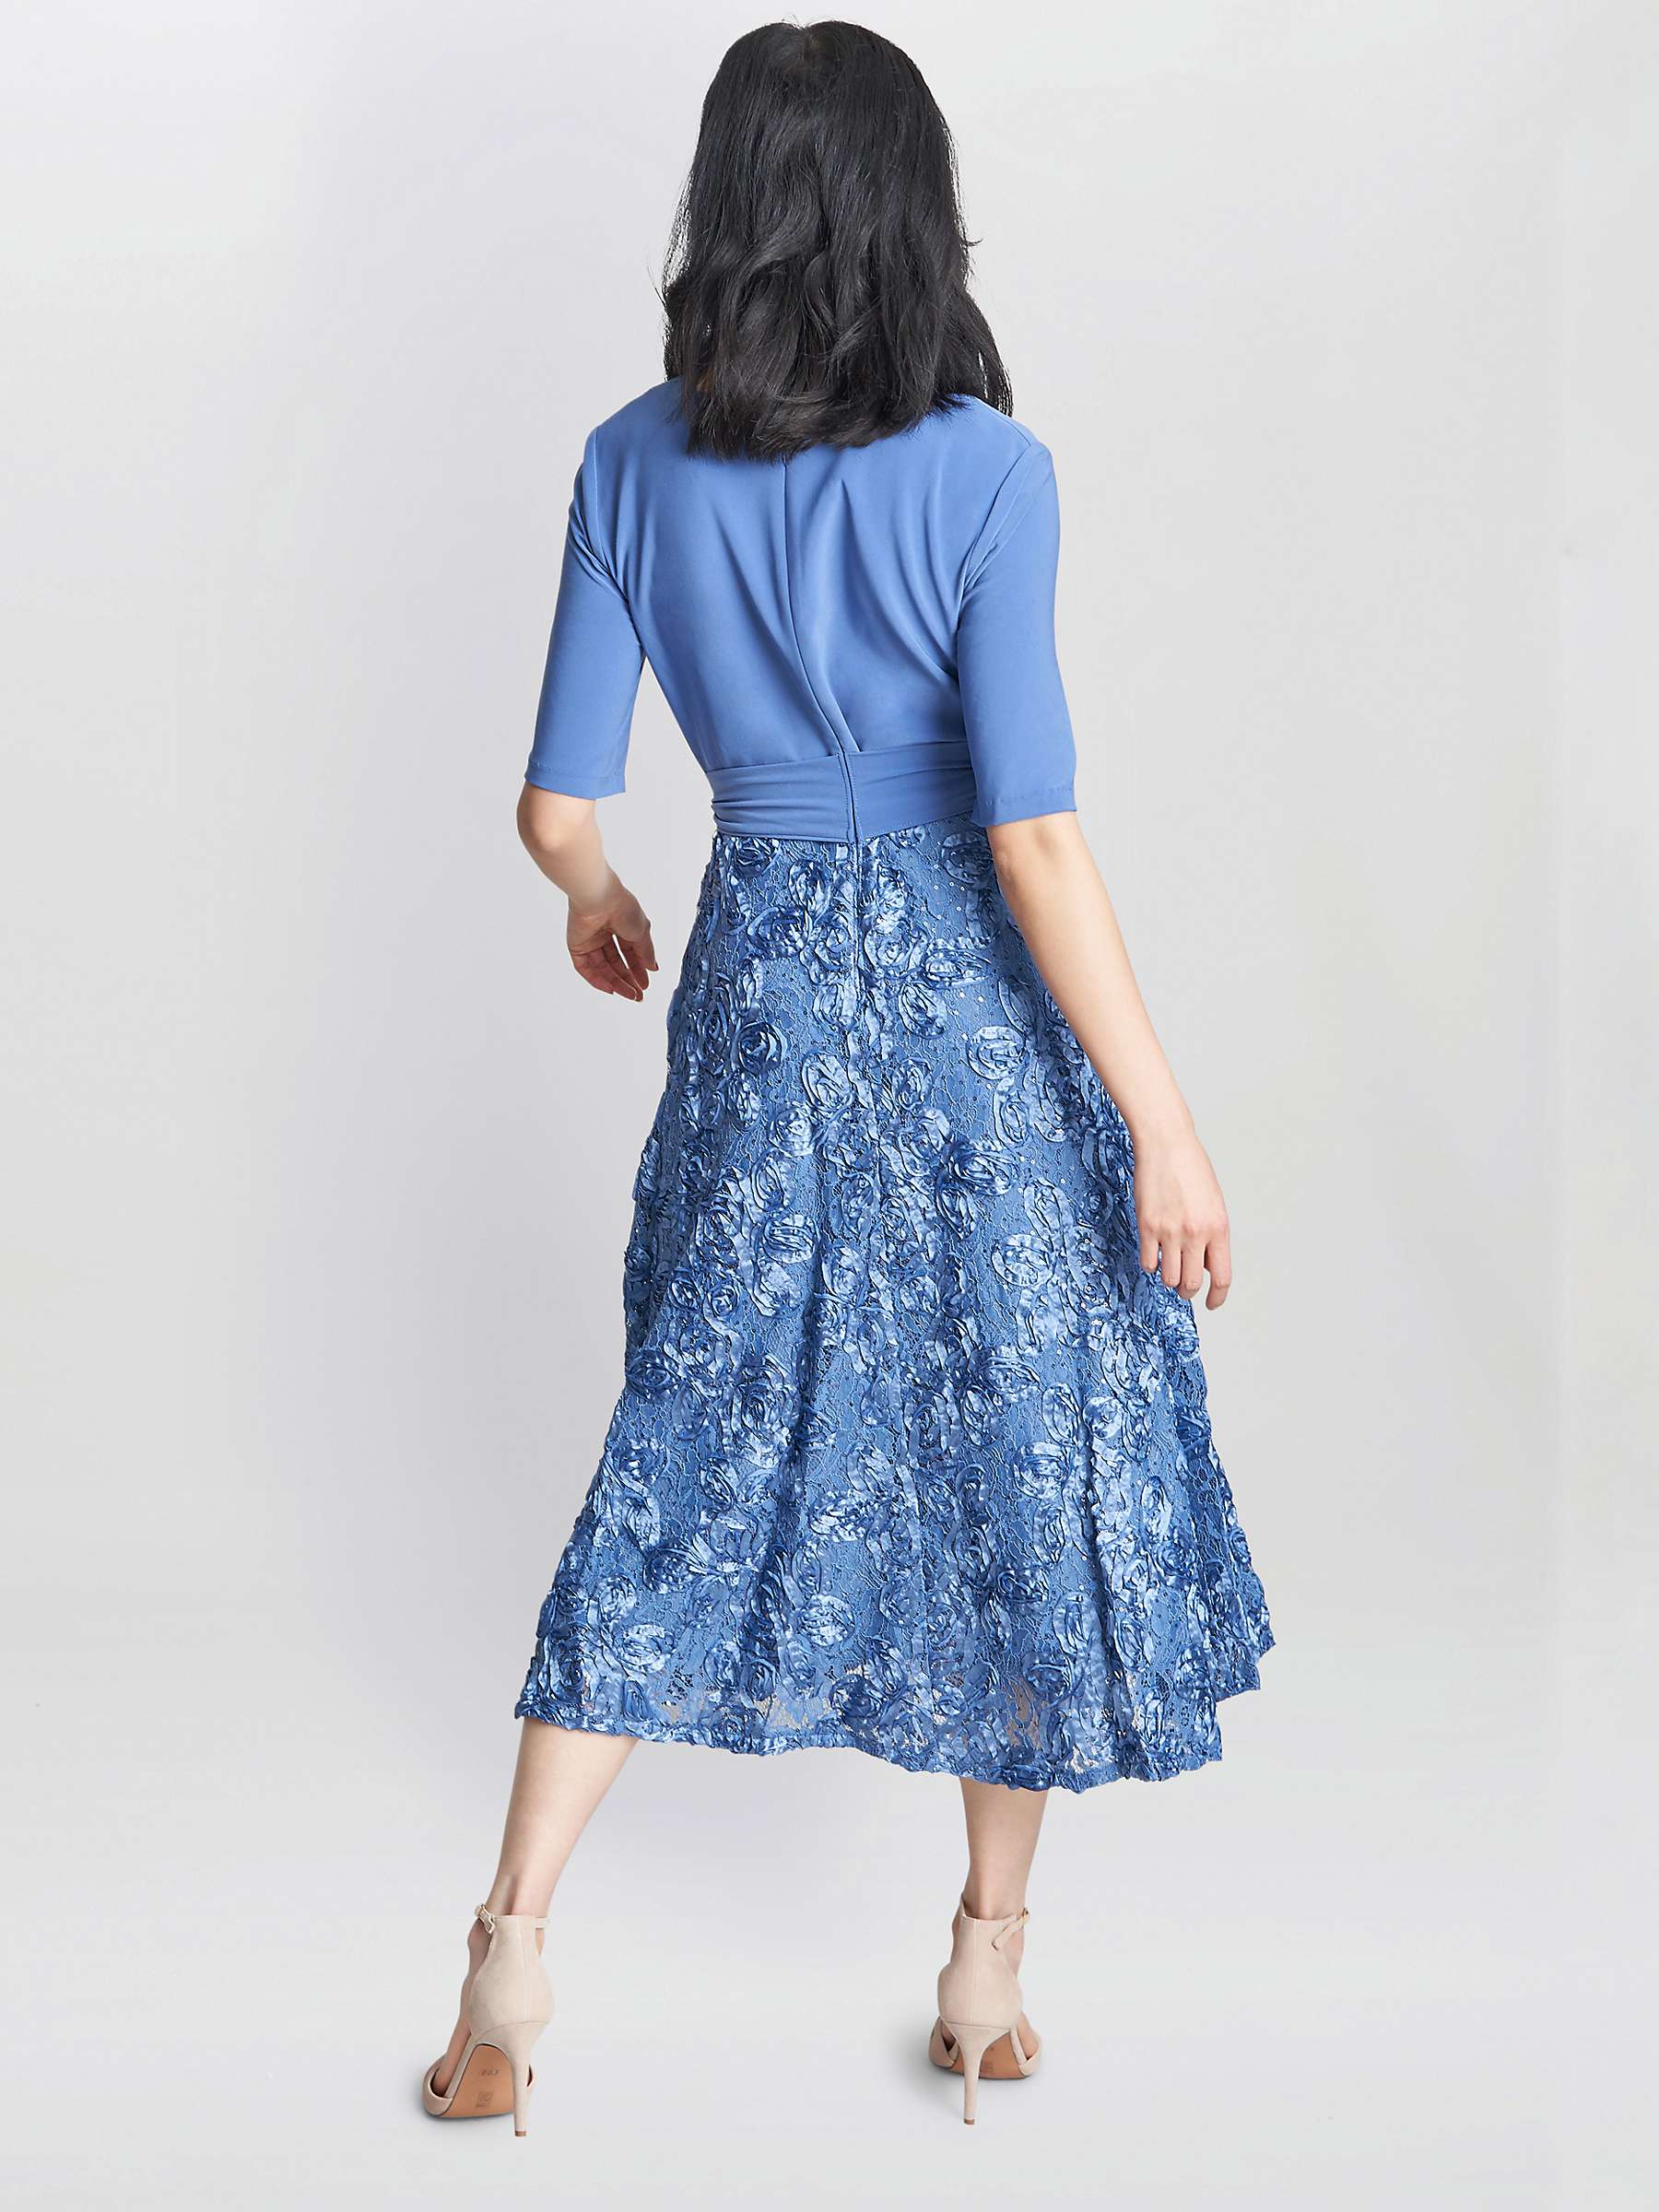 Buy Gina Bacconi Arlene Lace and Jersey Midi Cocktail Dress, Perri Online at johnlewis.com